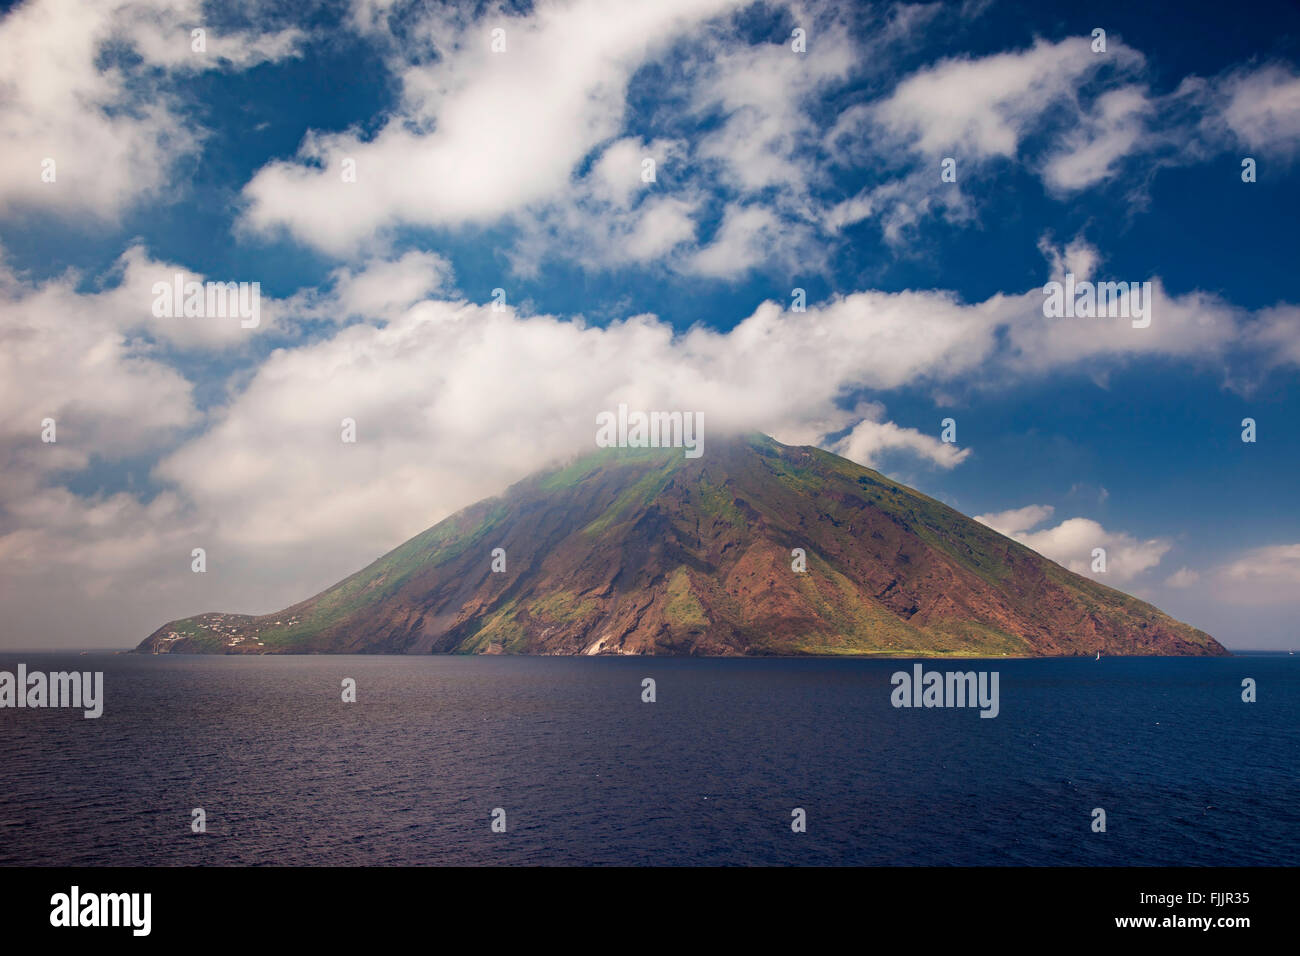 Stromboli in Aeolian Islands - Active volcano, and home to some 600 residents, Sicily Italy Stock Photo